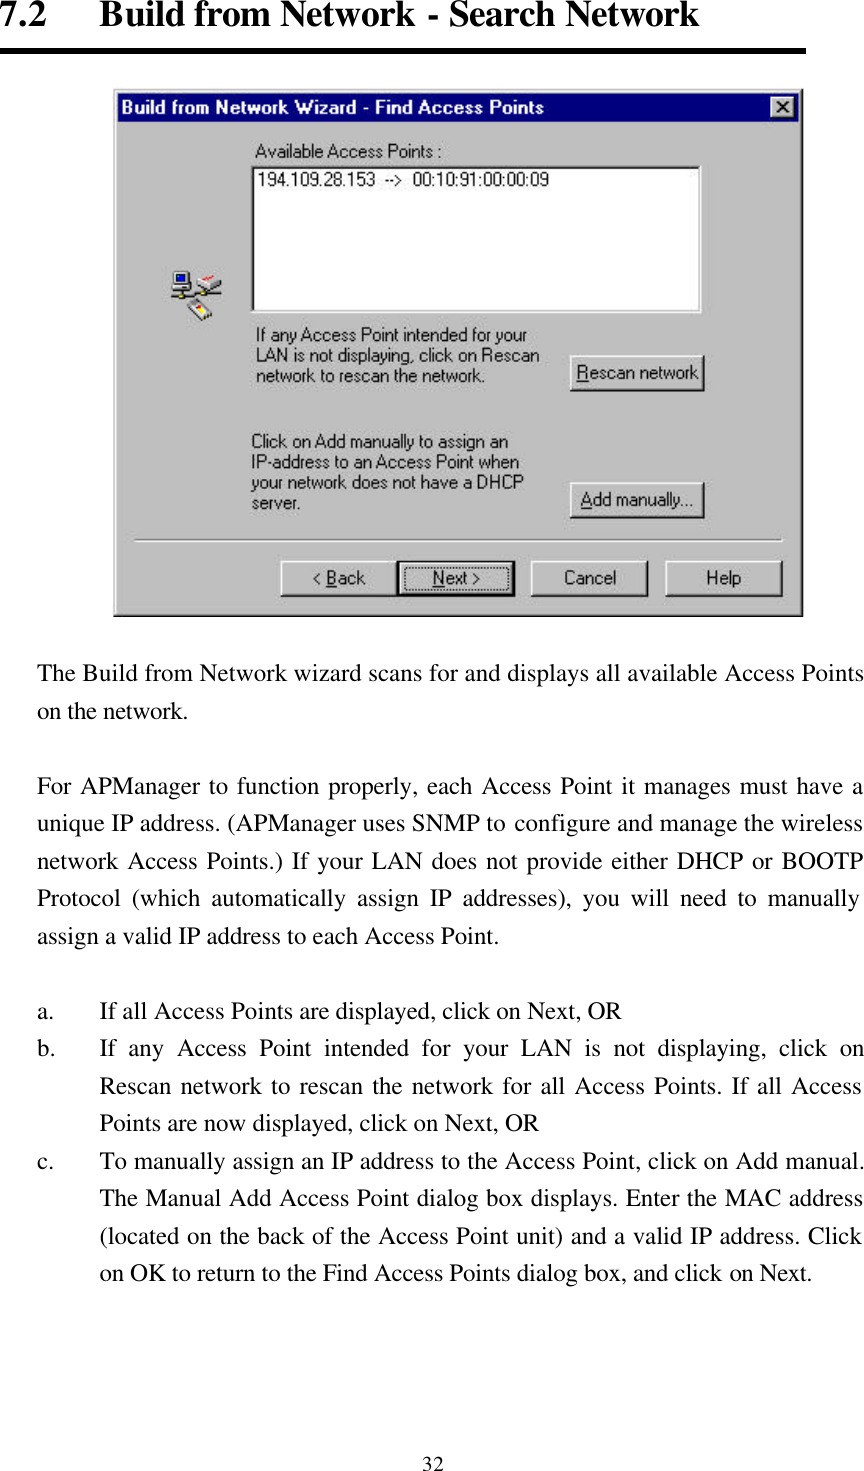  327.2   Build from Network - Search Network   The Build from Network wizard scans for and displays all available Access Points on the network.    For APManager to function properly, each Access Point it manages must have a unique IP address. (APManager uses SNMP to configure and manage the wireless network Access Points.) If your LAN does not provide either DHCP or BOOTP Protocol (which automatically assign IP addresses), you will need to manually assign a valid IP address to each Access Point.  a. If all Access Points are displayed, click on Next, OR b.  If any Access Point intended for your LAN is not displaying, click on Rescan network to rescan the network for all Access Points. If all Access Points are now displayed, click on Next, OR c. To manually assign an IP address to the Access Point, click on Add manual. The Manual Add Access Point dialog box displays. Enter the MAC address (located on the back of the Access Point unit) and a valid IP address. Click on OK to return to the Find Access Points dialog box, and click on Next.     